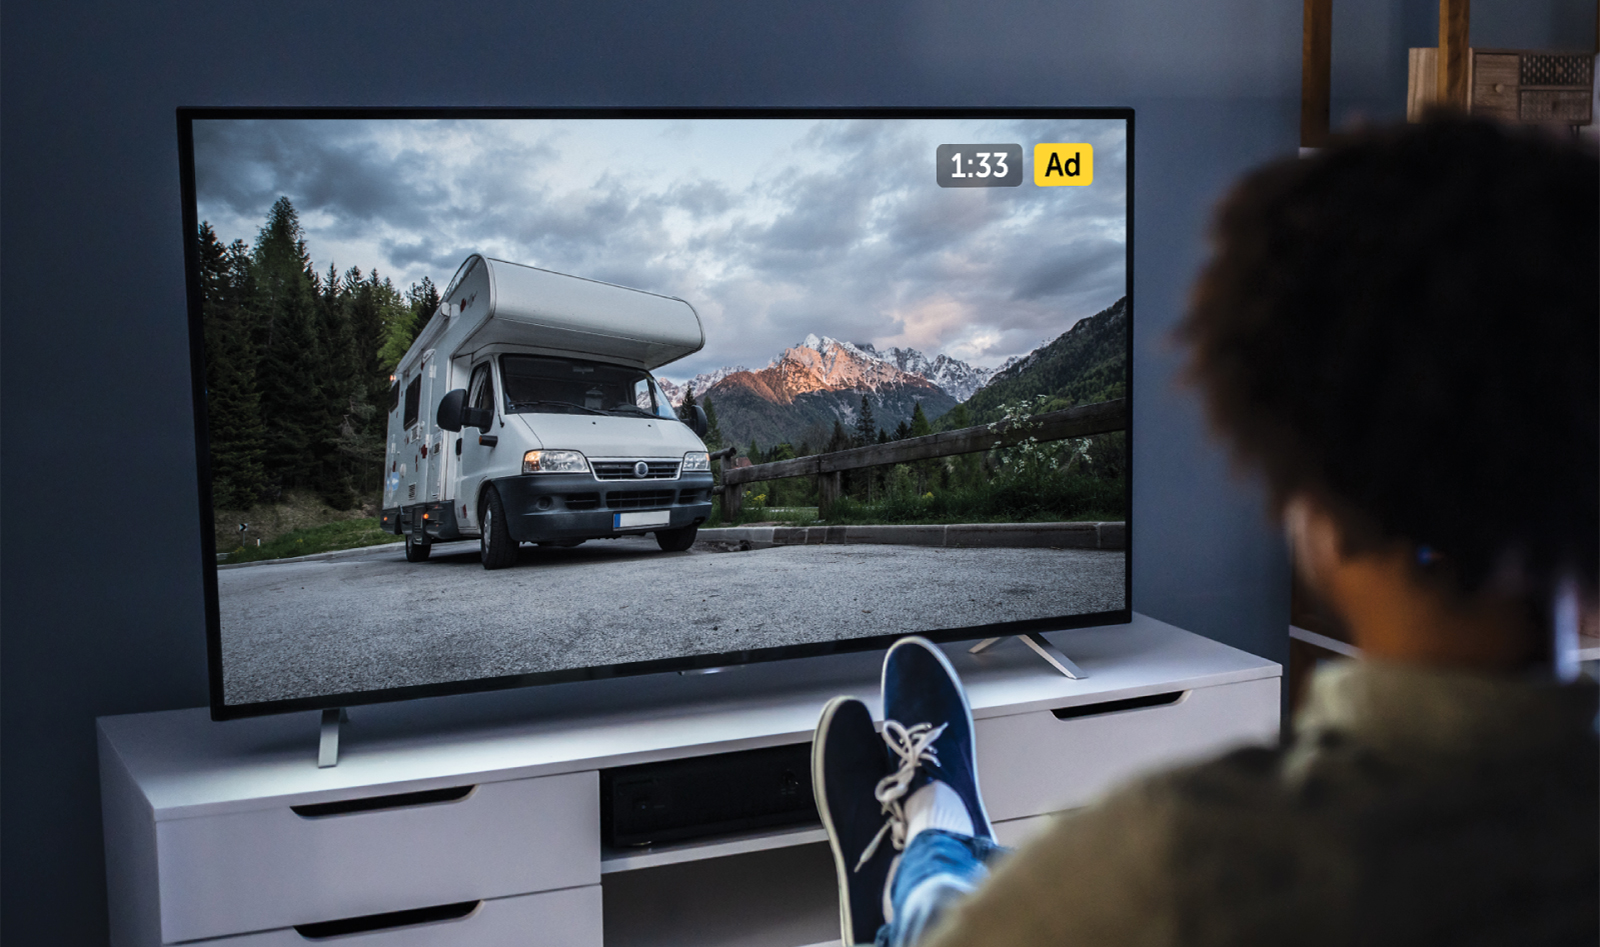 Smart TVs & Connected Devices Ads